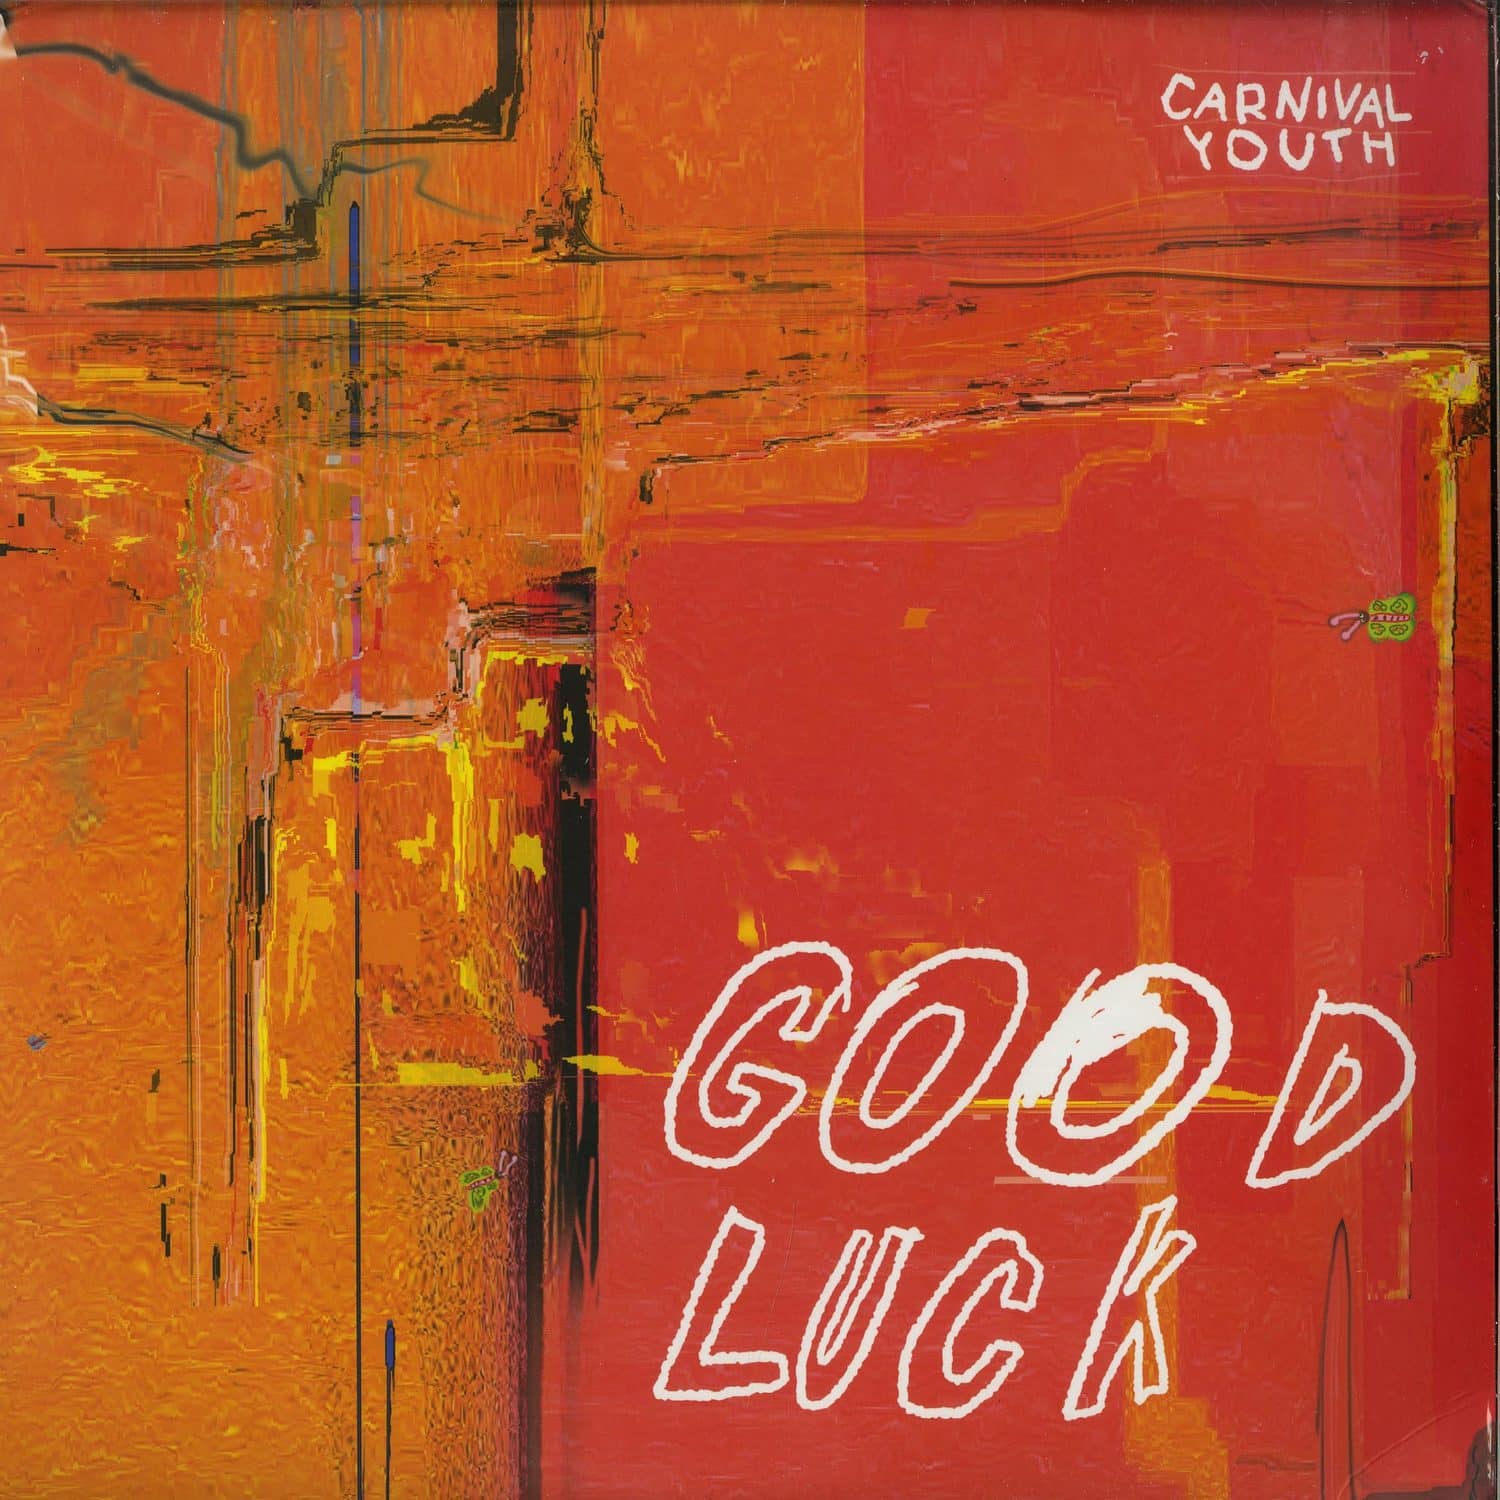 Carnival Youth - GOOD LUCK  